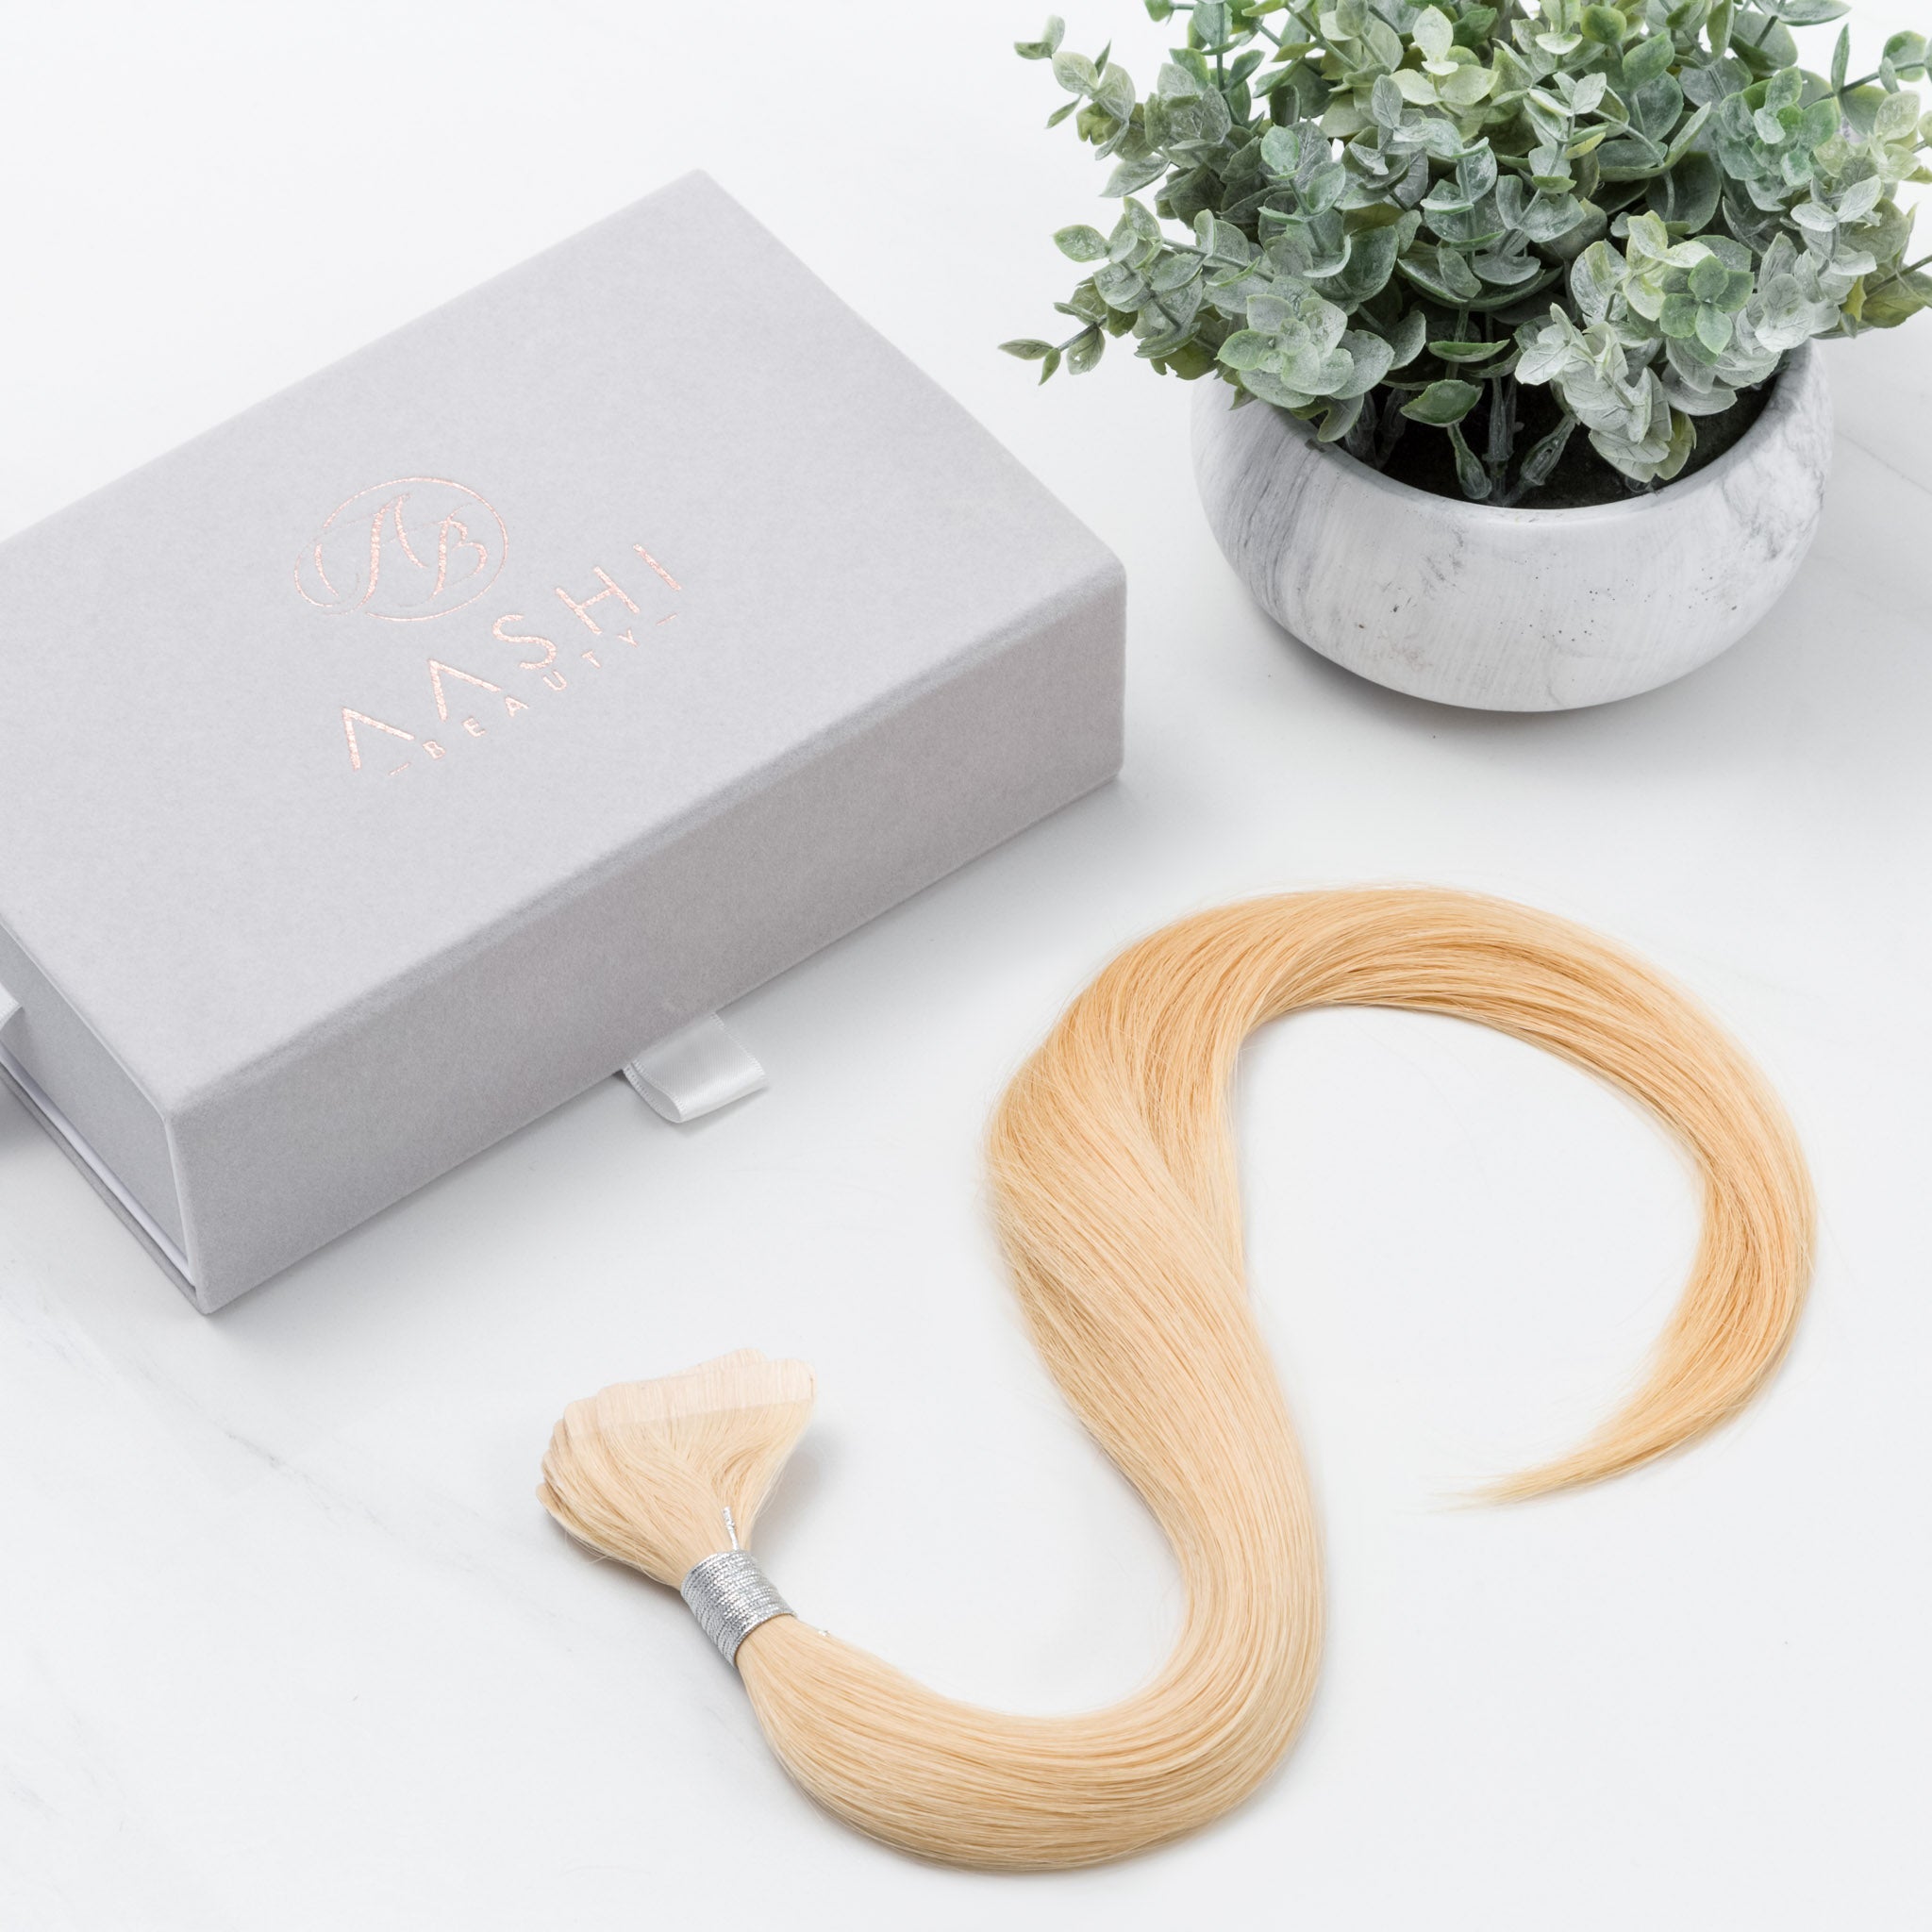 Golden Blonde (#24) Tape-In - Natural Drawn (thin) - Aashi Beauty